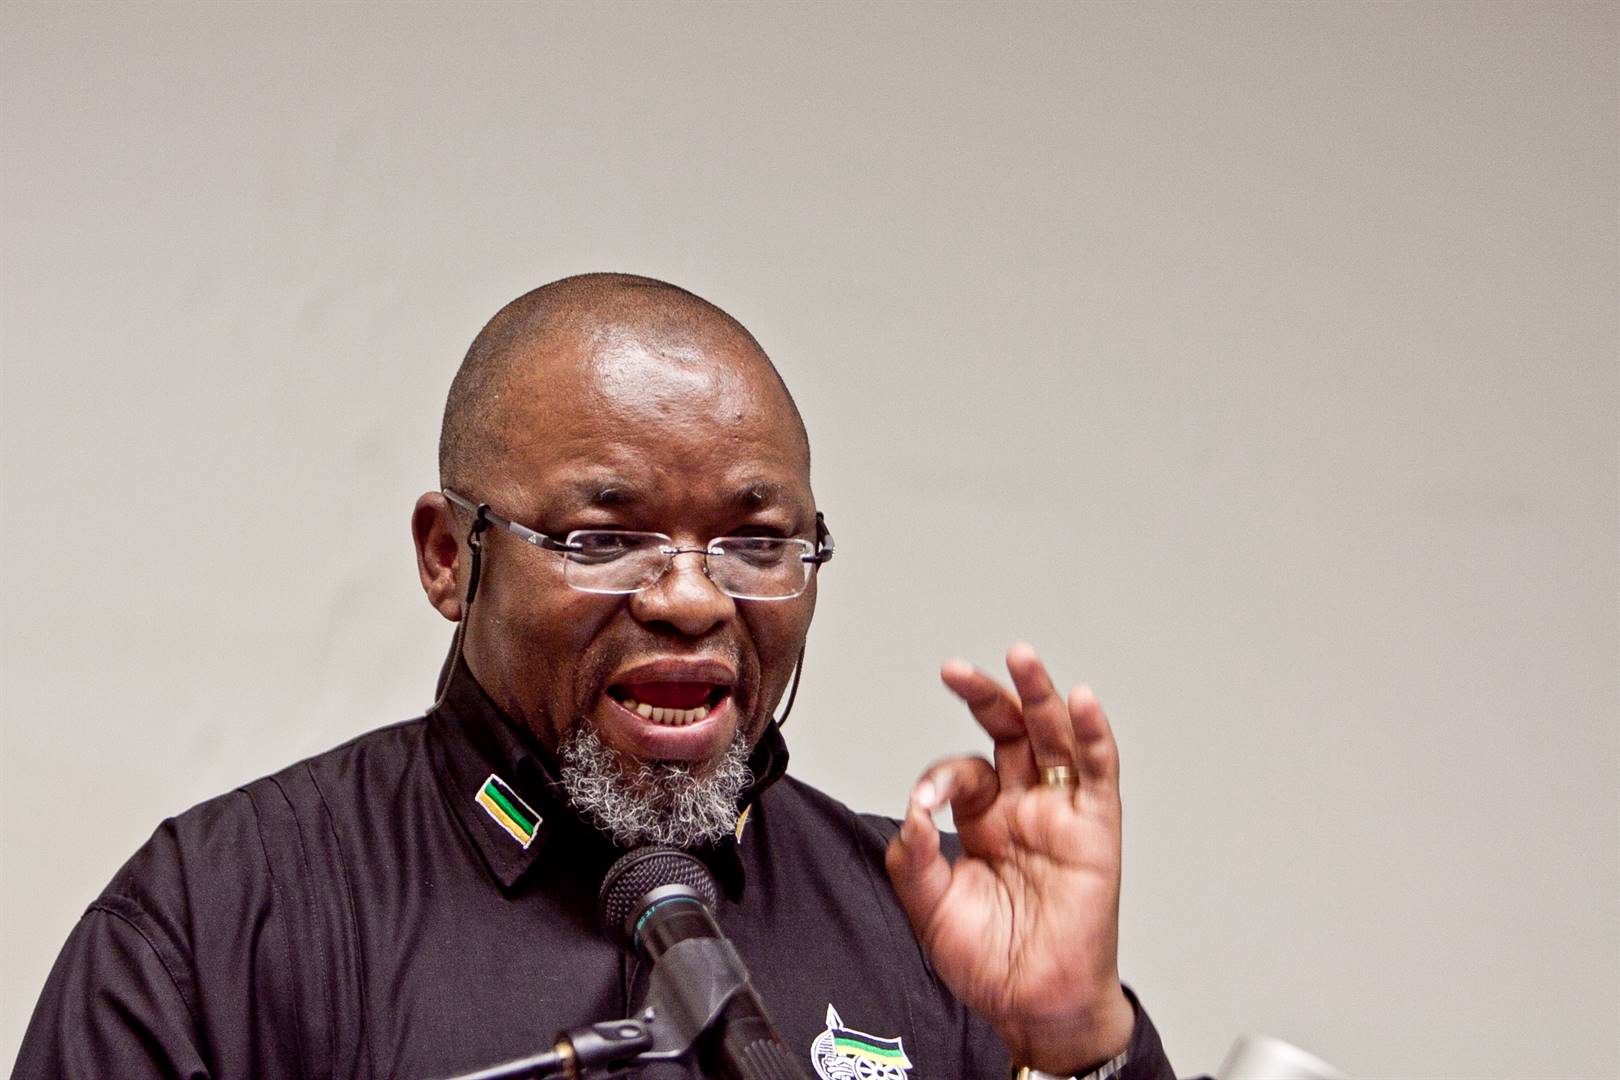 Mineral Resources and Energy Minister Gwede Mantashe previously called the dumping of coal "economic suicide" and that switching off  coal plants would allow South Africans to "breathe fresh air in the darkness"